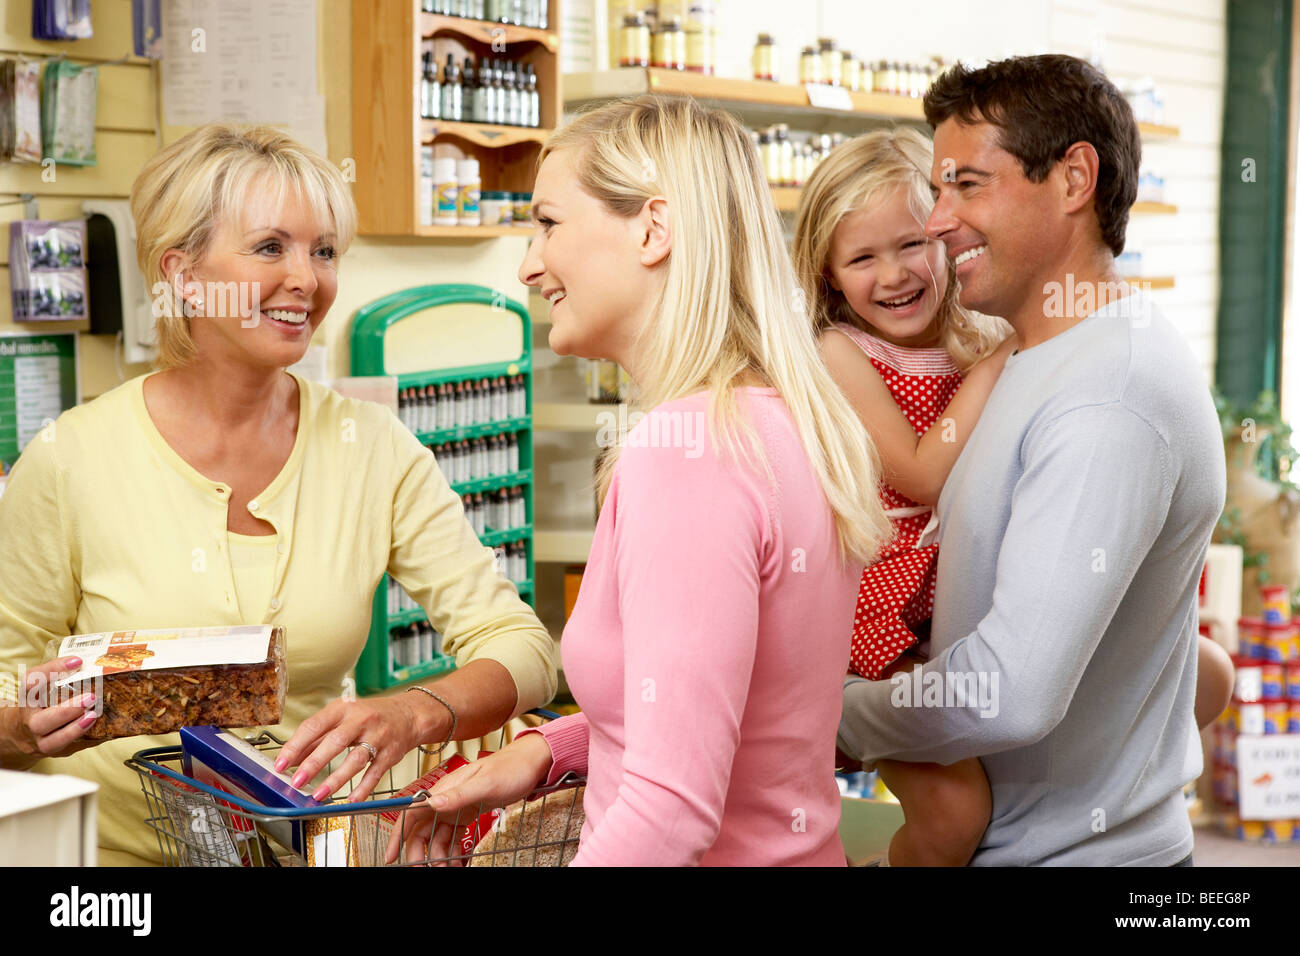 Female sales assistant in health food store Stock Photo